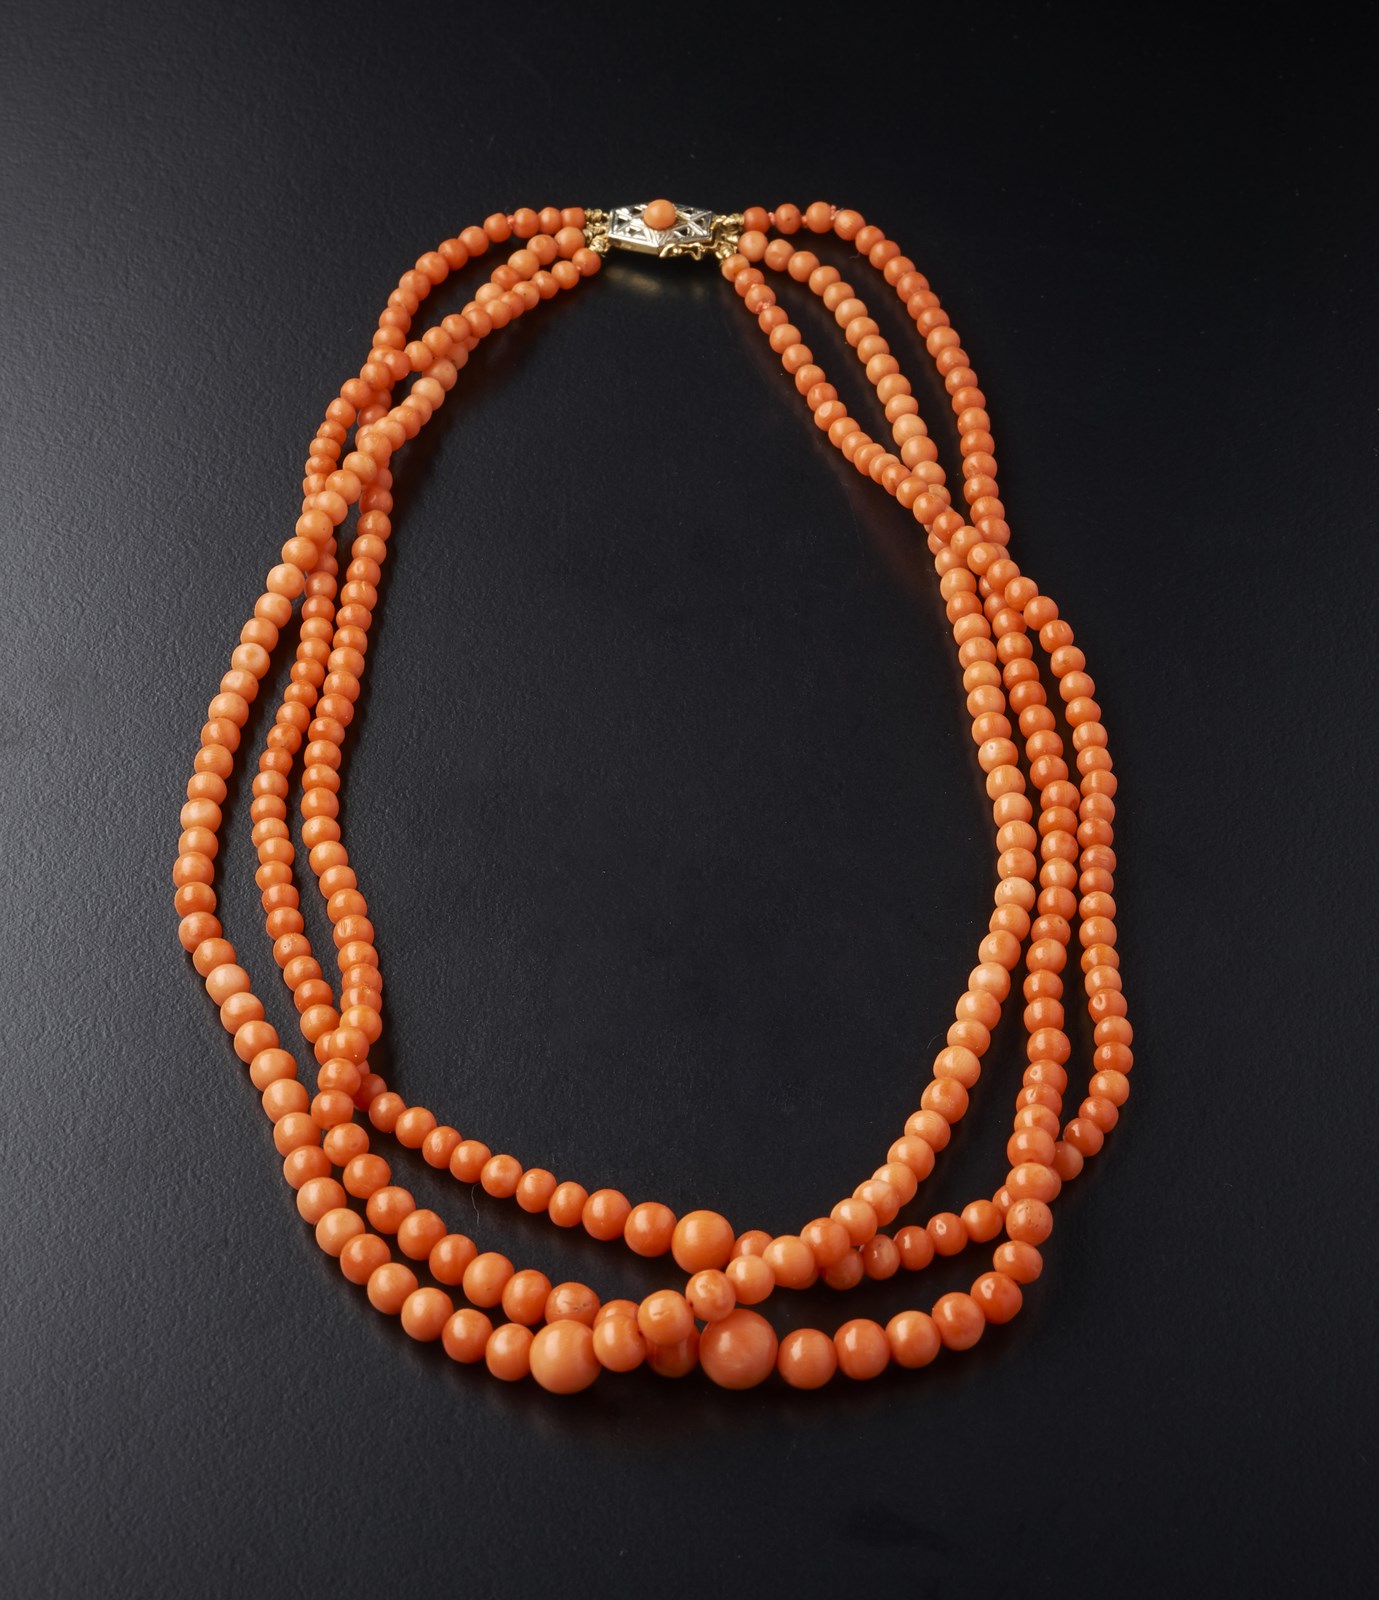 Coral necklace with three threads slightly degradè with white gold and yellow 750/1000 closure. (. )